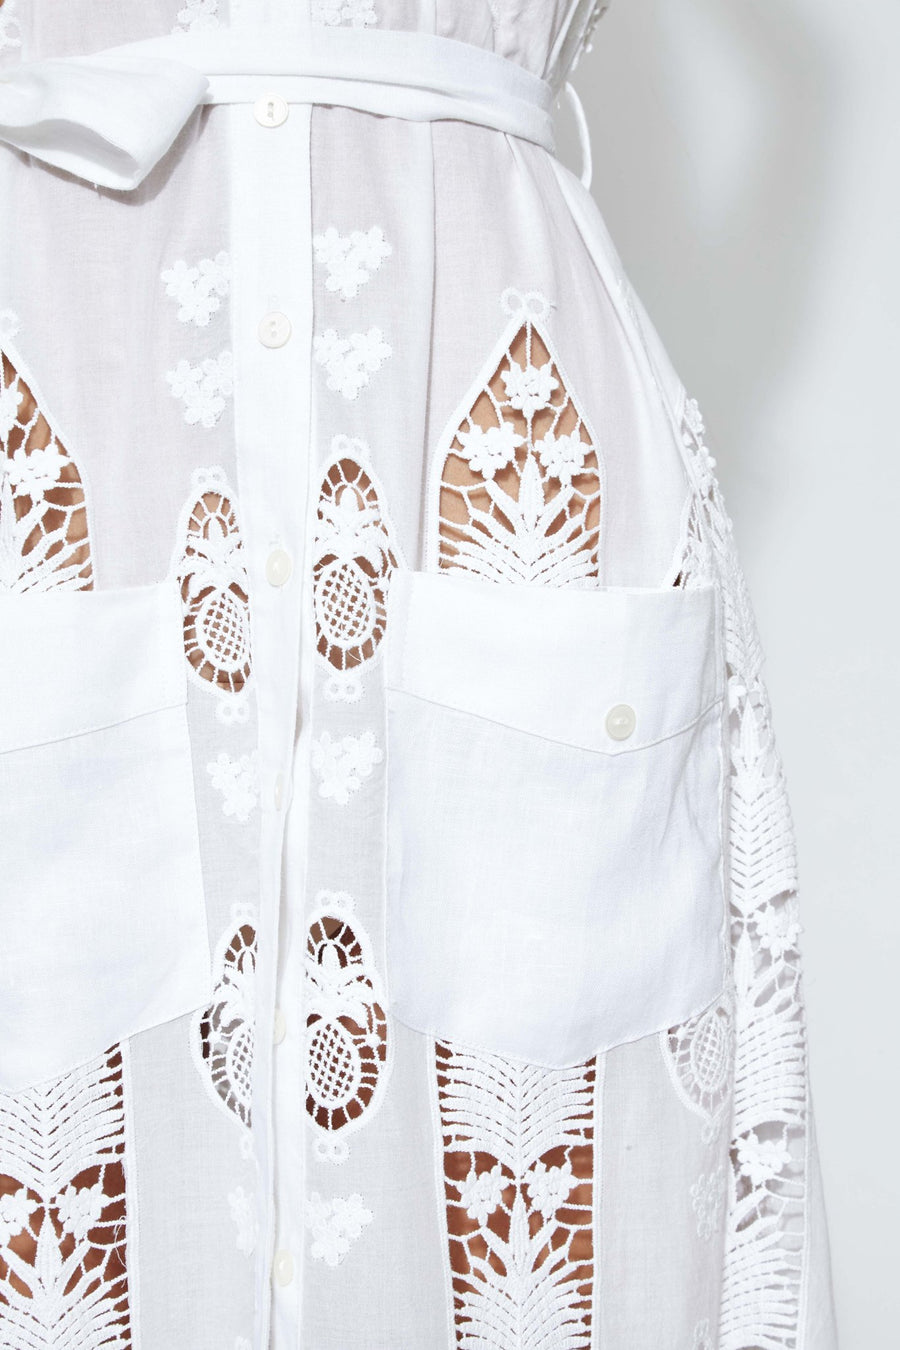 This is a detail photo of square pockets on the front of a white cotton embroidered dress. The pockets fall below the waist and lace design shows small flowers and pineapples.